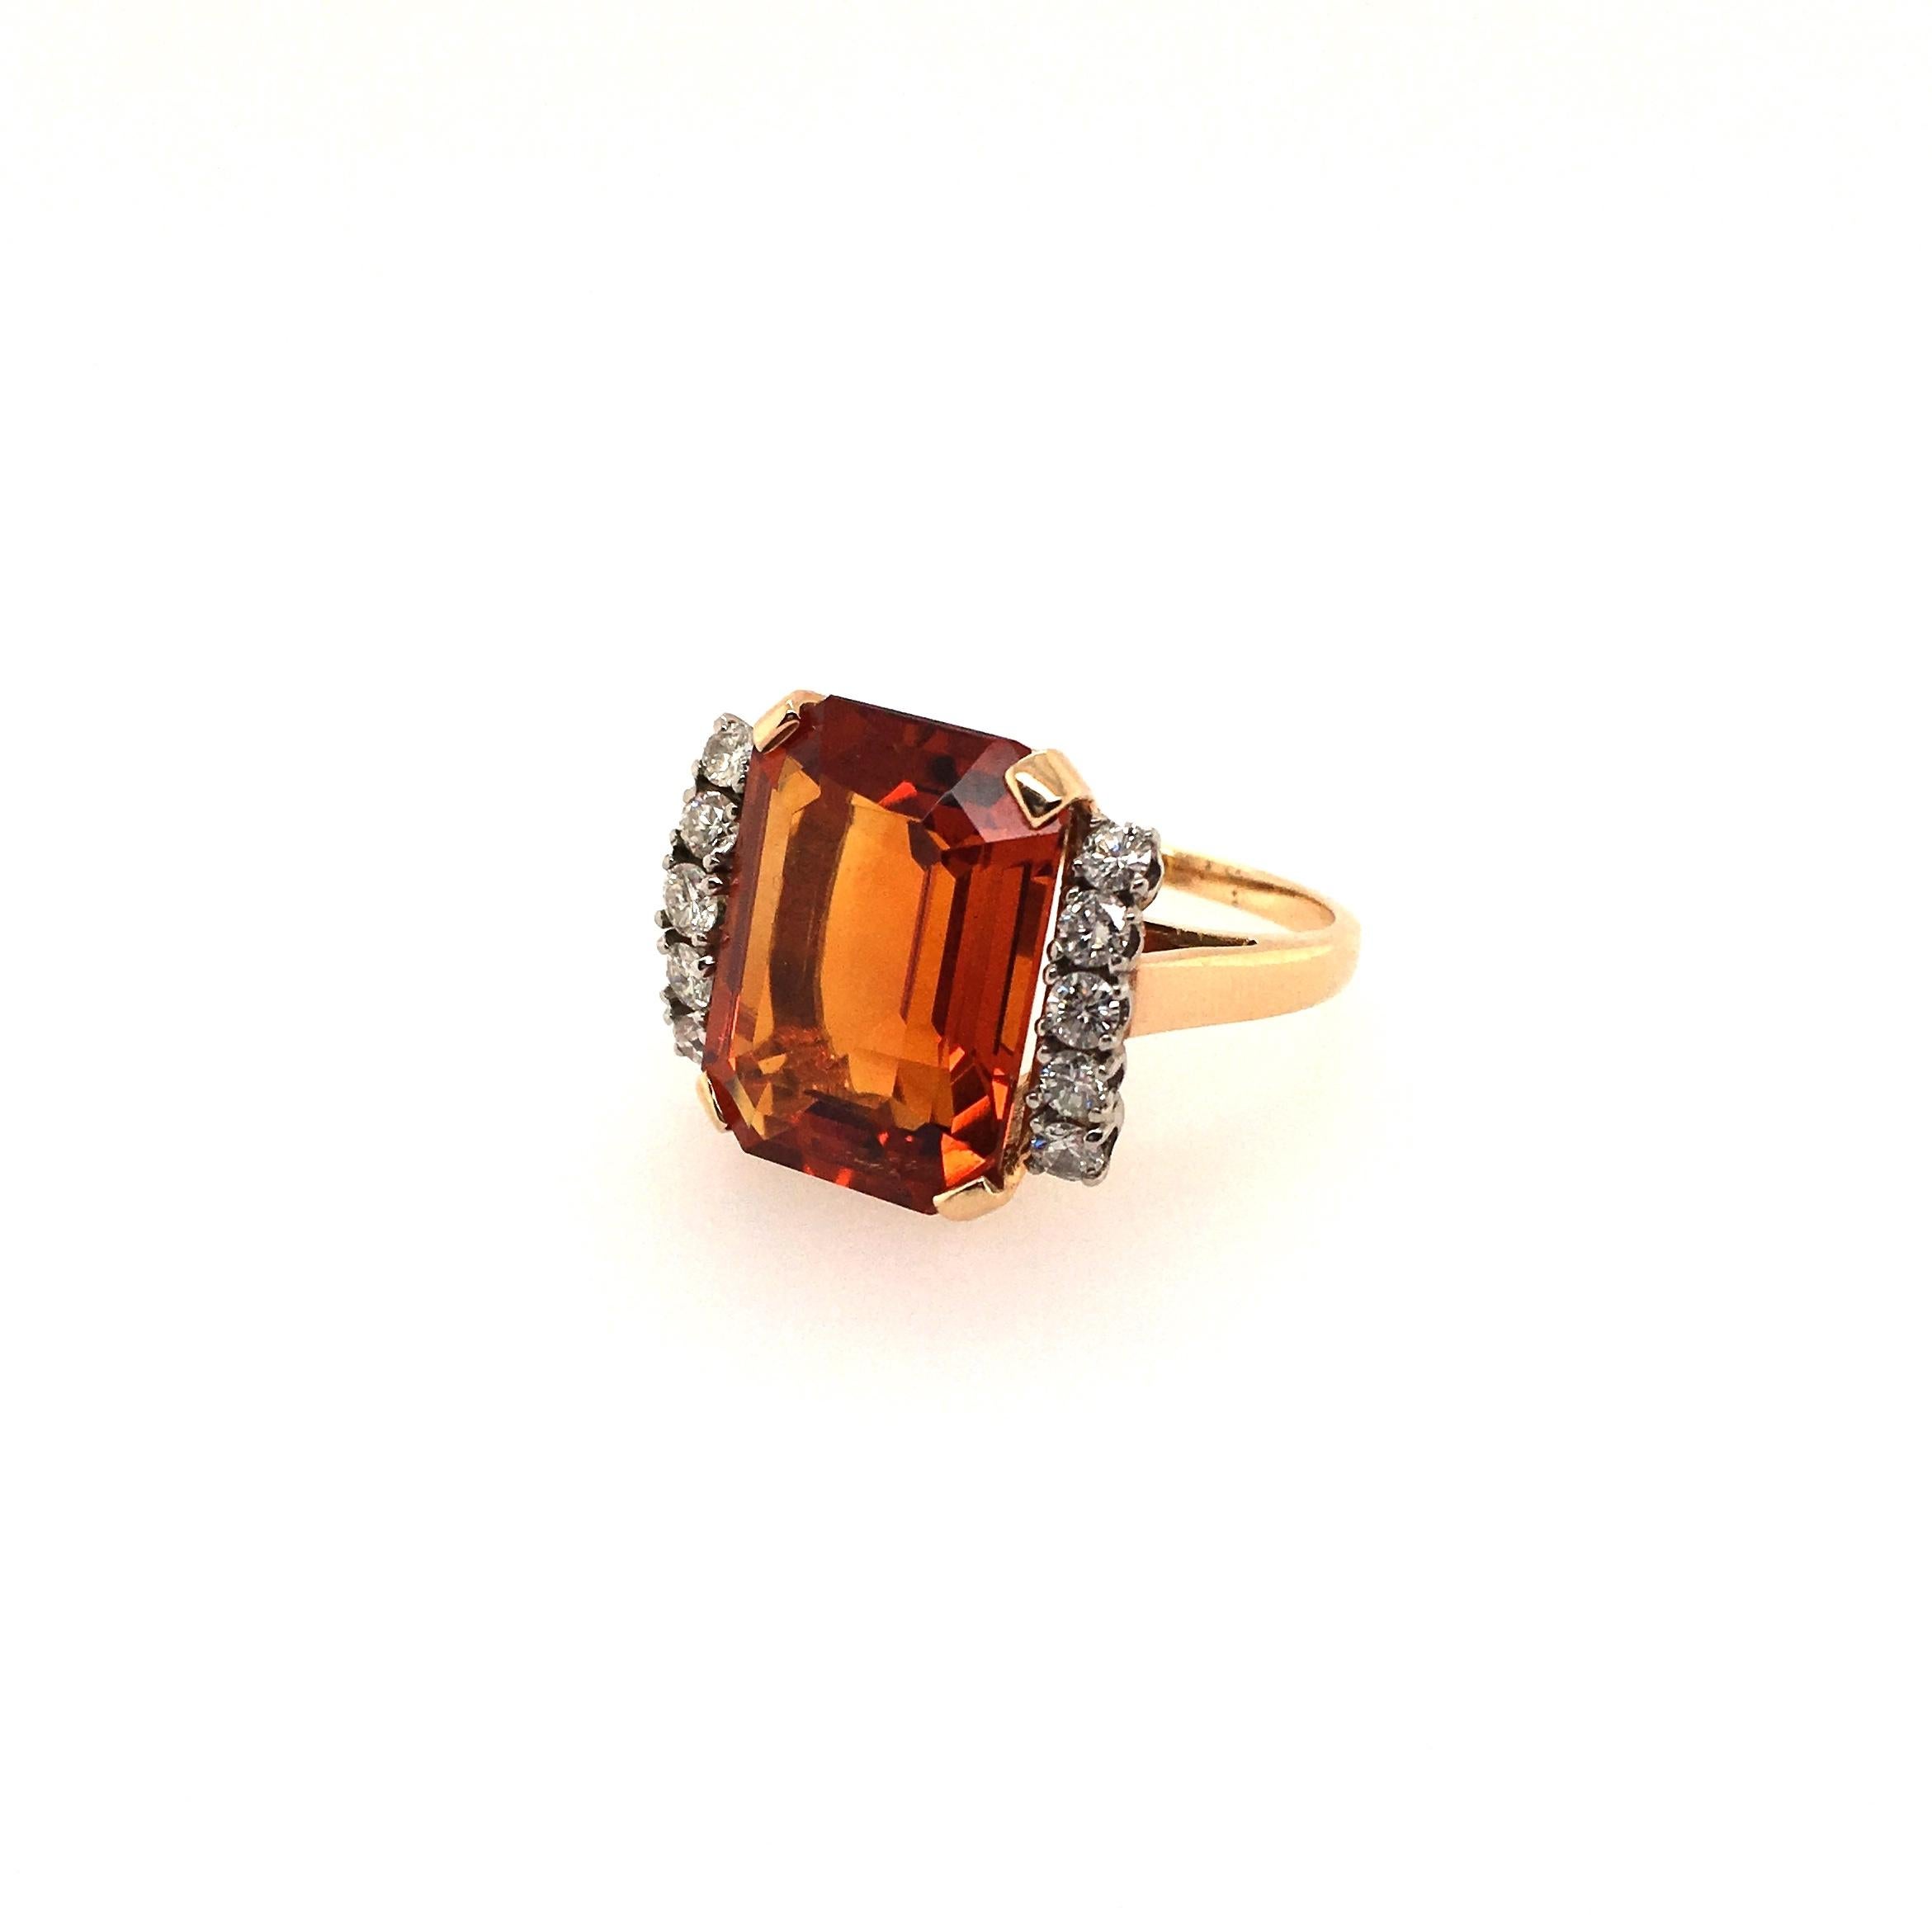 A 14 karat yellow gold, citrine and diamond ring. Set with an emerald cut golden orangen citrine, measuring approximately 16.00 x 12.50 x 7.4mm, and weighing approximately 9.85 carats, flanked by rows of circular cut diamonds. Ten (10) circular cut